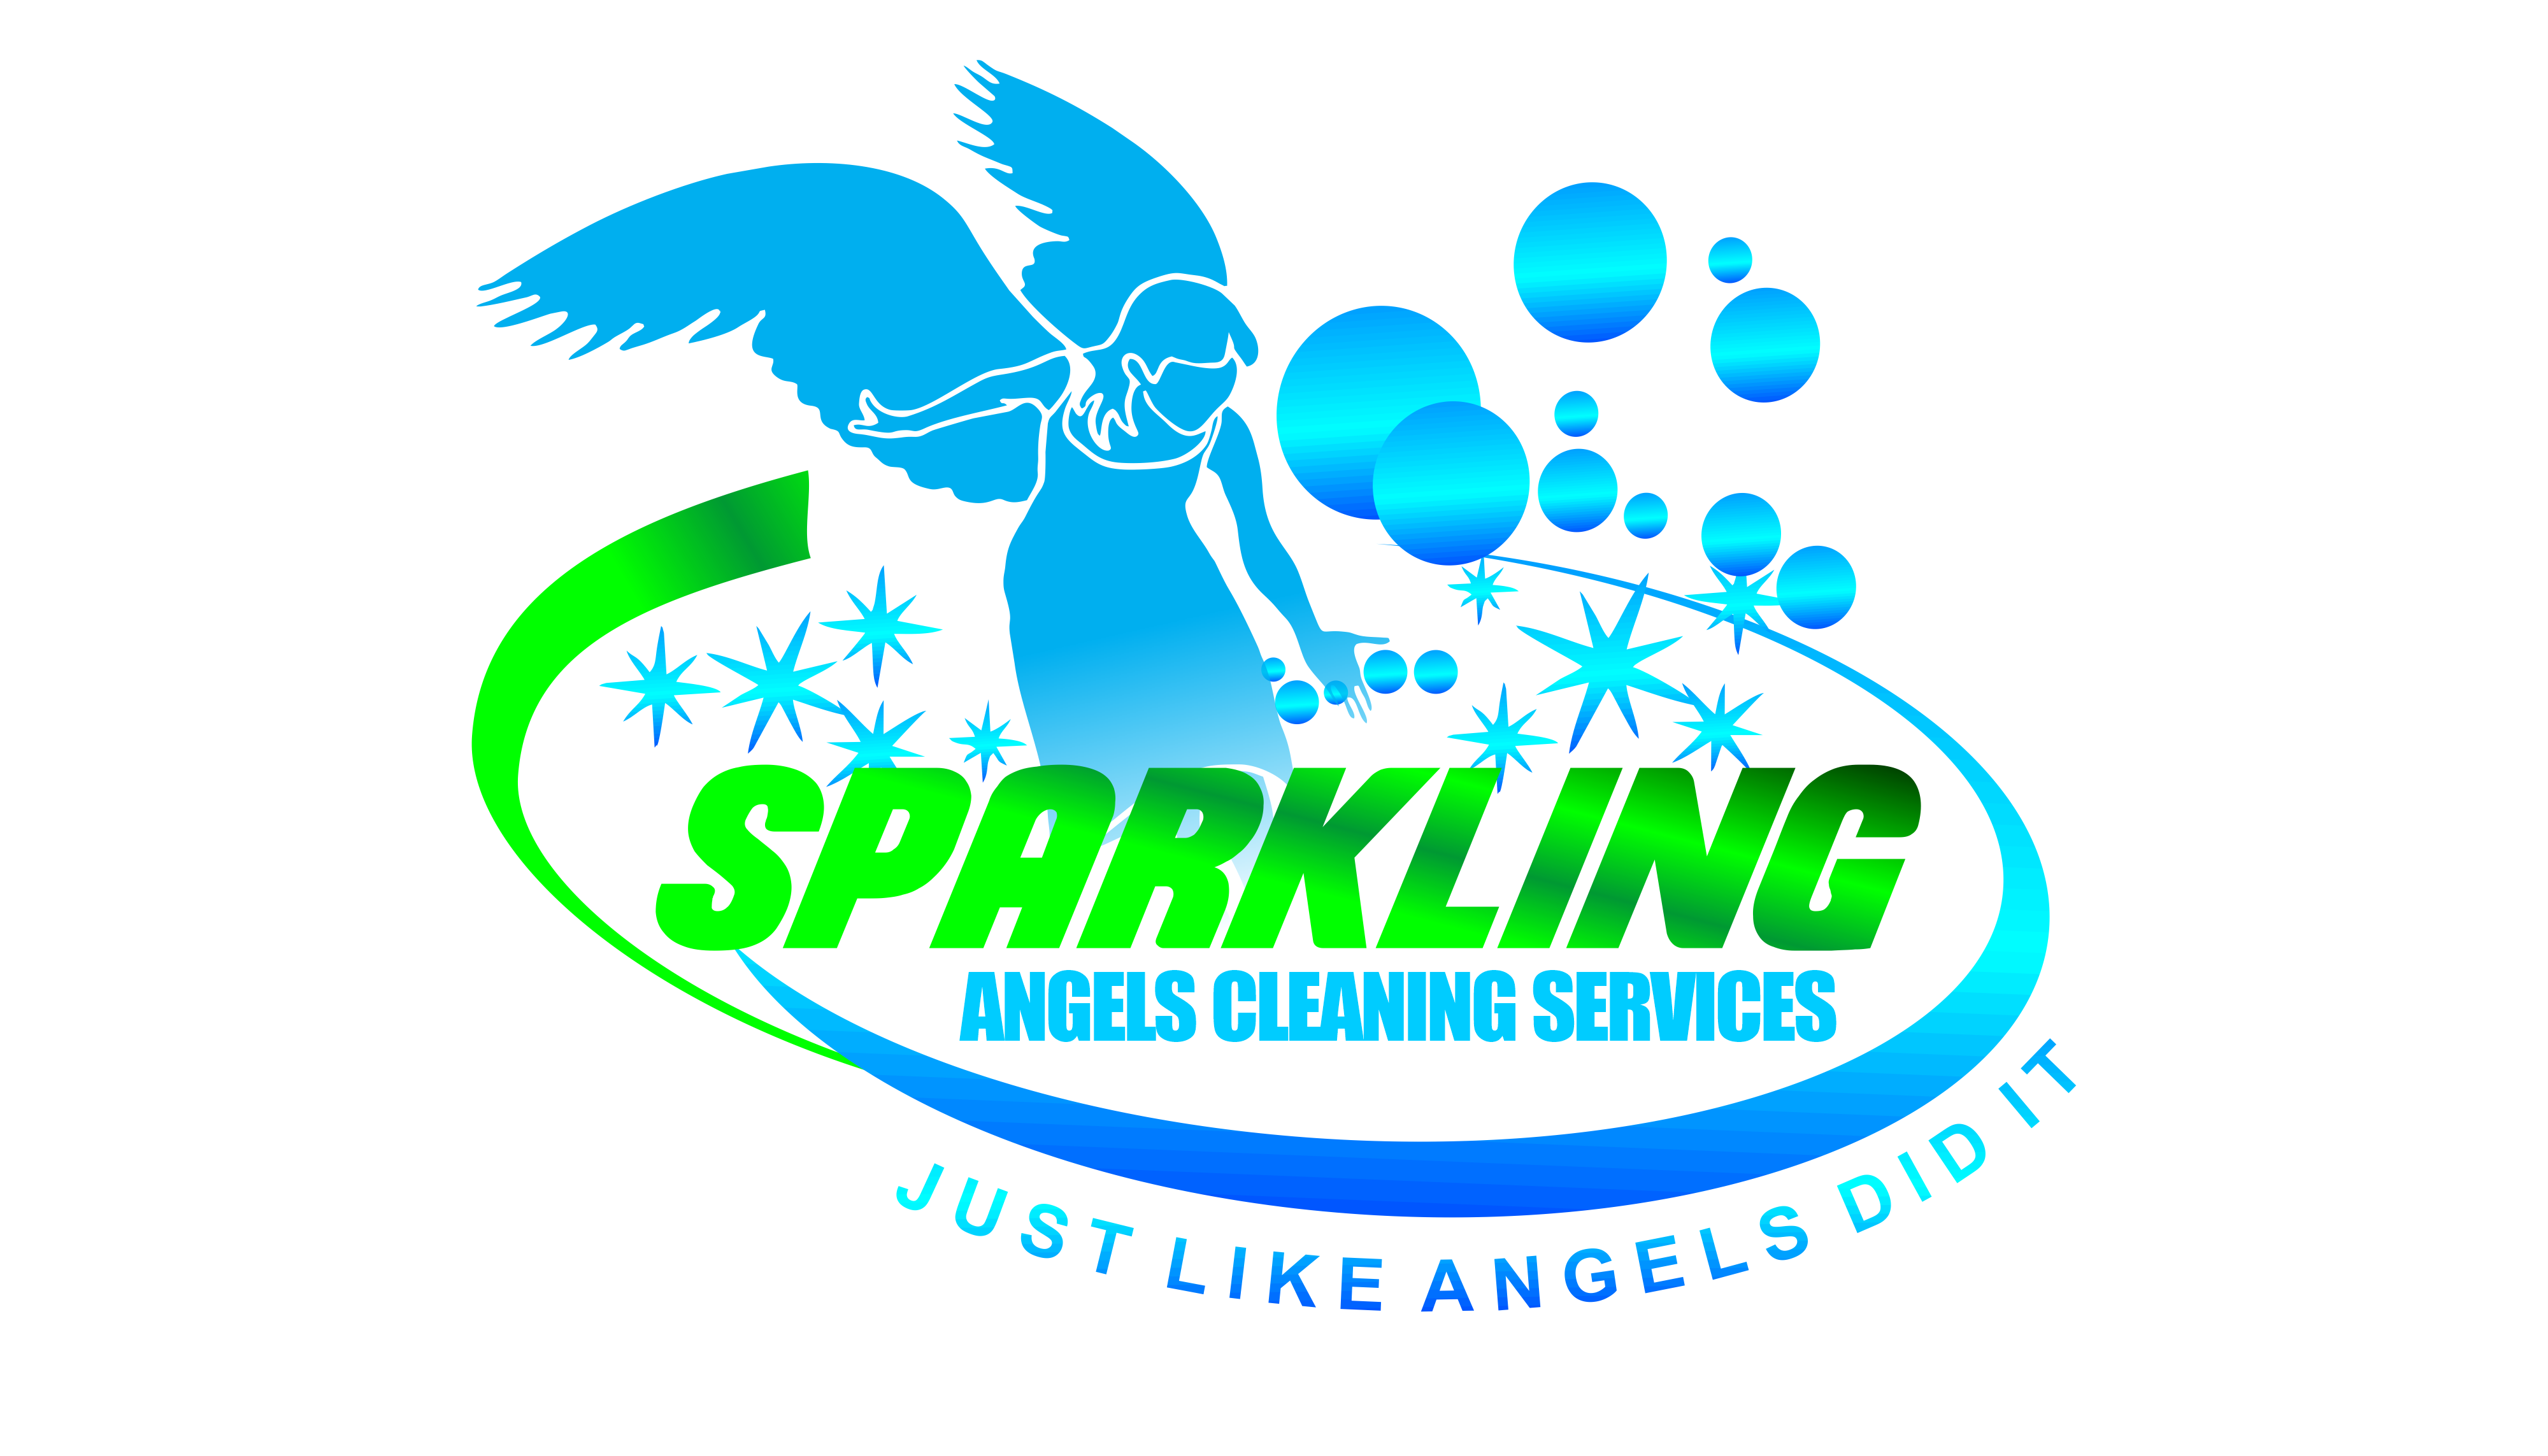 Sparkling Angels Cleaning Services, LLC